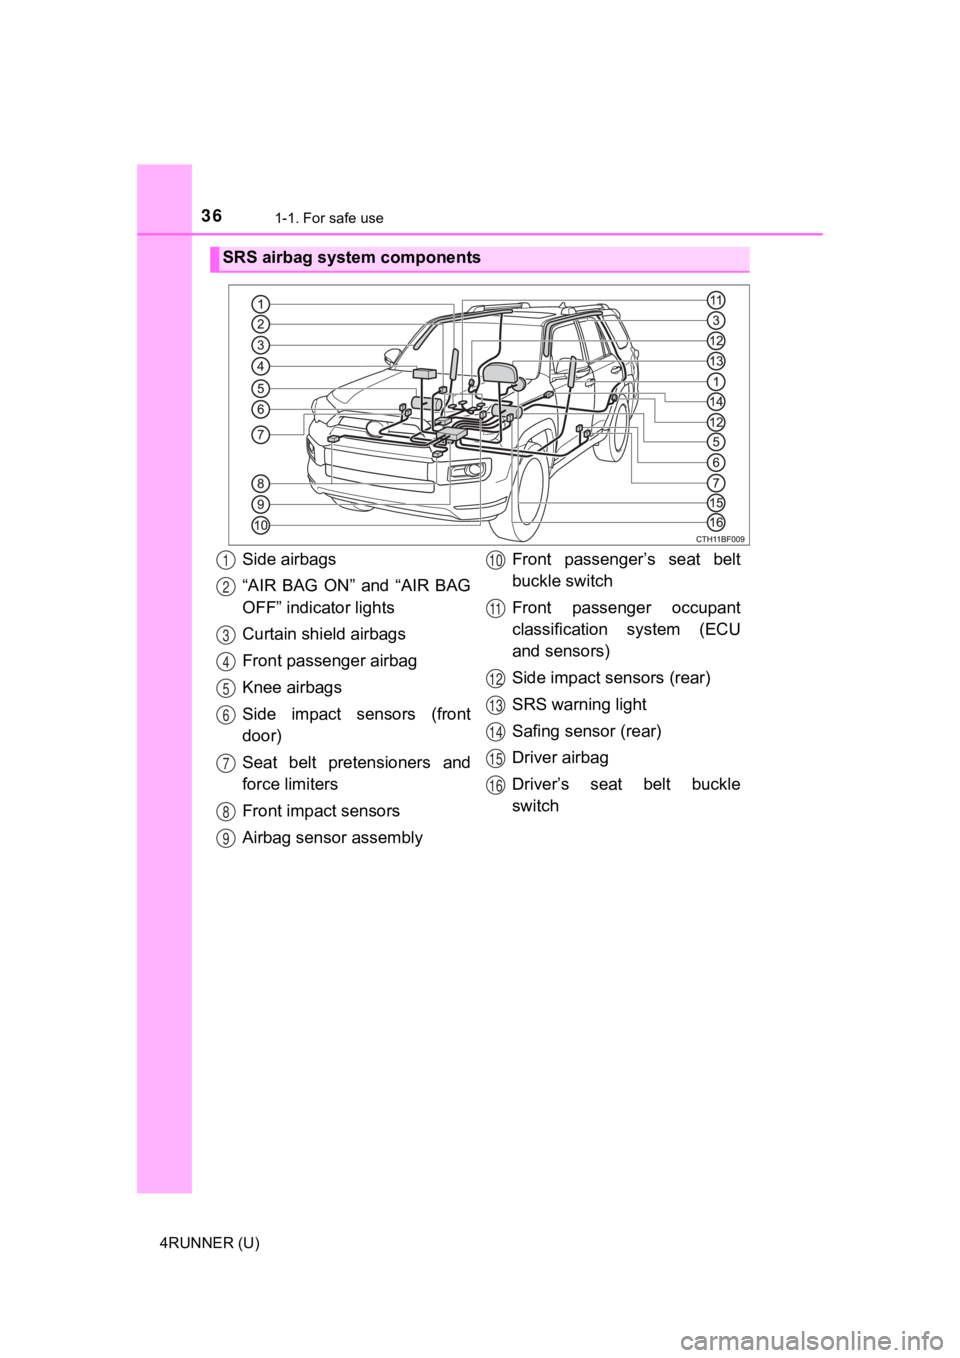 TOYOTA 4RUNNER 2021   (in English) Owners Guide 361-1. For safe use
4RUNNER (U)
SRS airbag system components
Side airbags
“AIR  BAG  ON”  and  “AIR  BAG
OFF” indicator lights
Curtain shield airbags
Front passenger airbag
Knee airbags
Side  